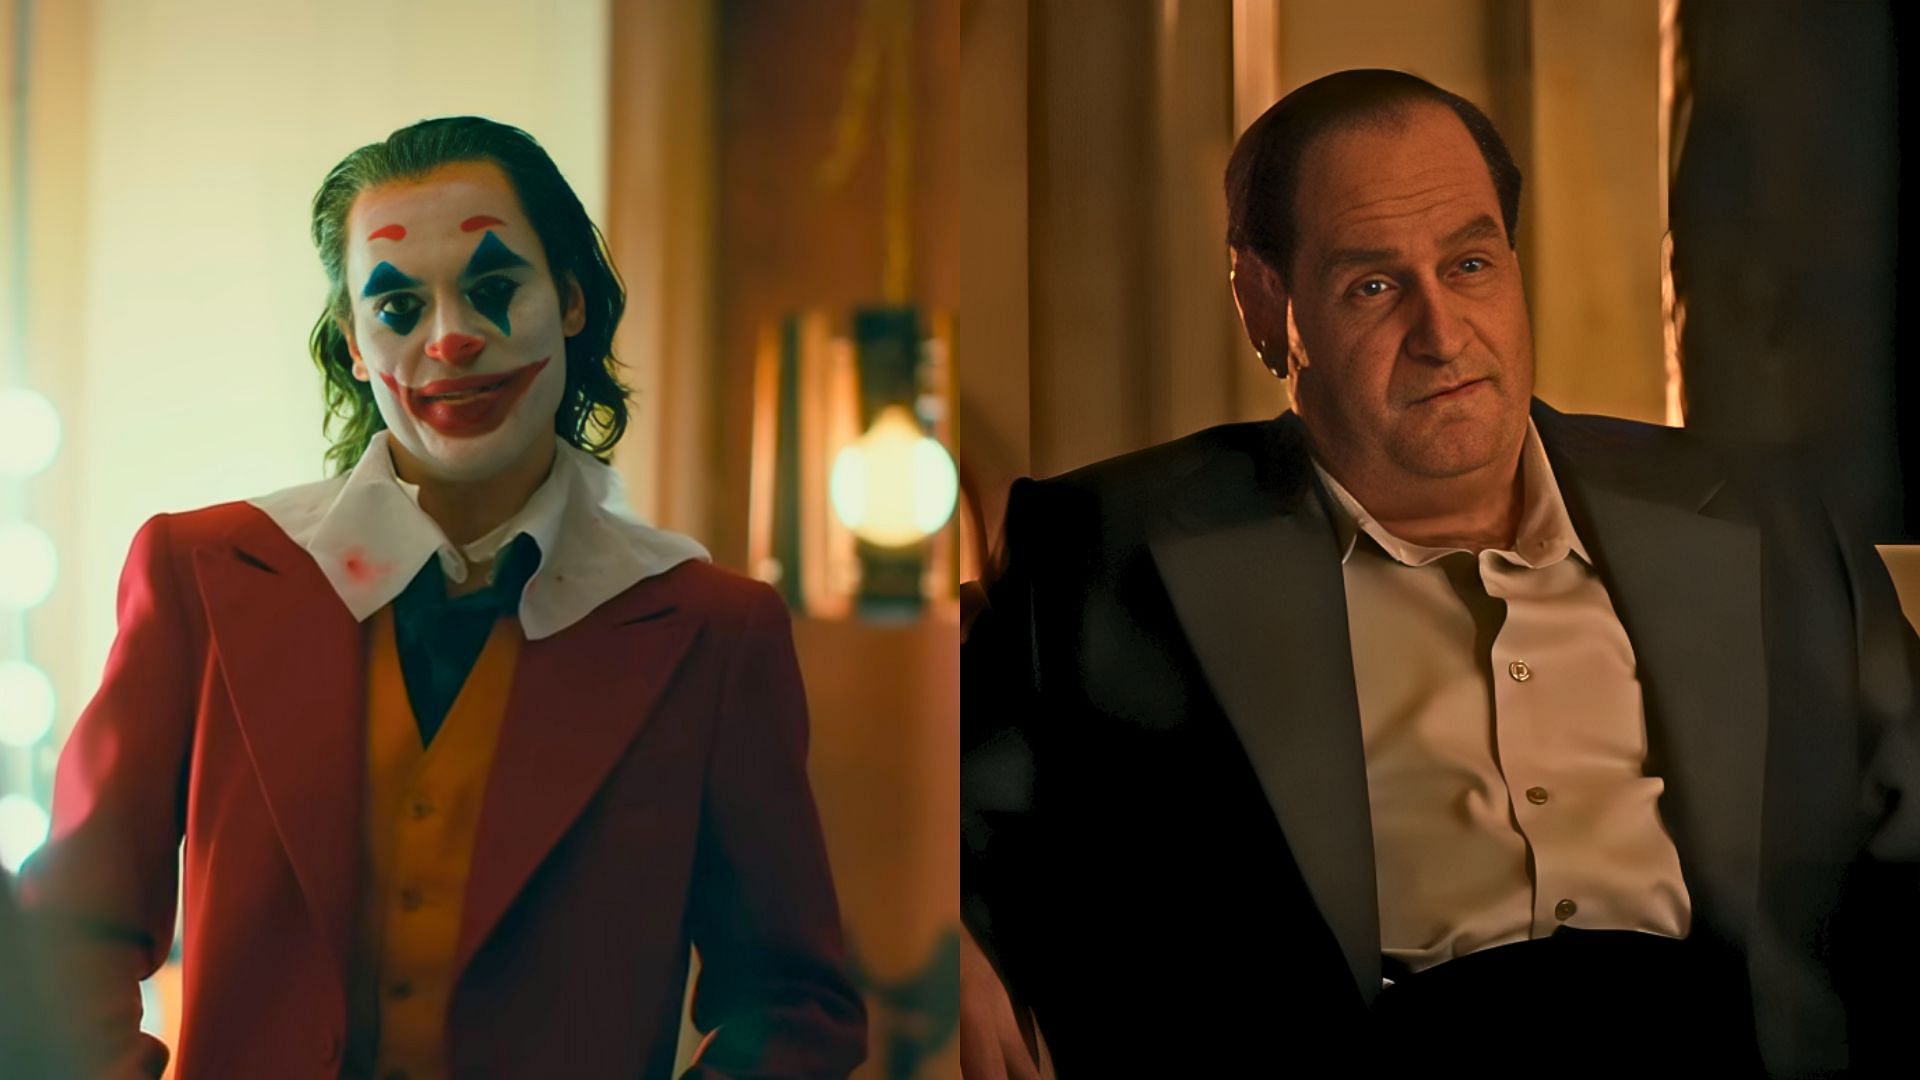 The Joker (L) and The Penguin (R) are iconic villains who team up in the Batman universe (Images via Youtube/Warner Bros, 2:01 and Max, 00:15)